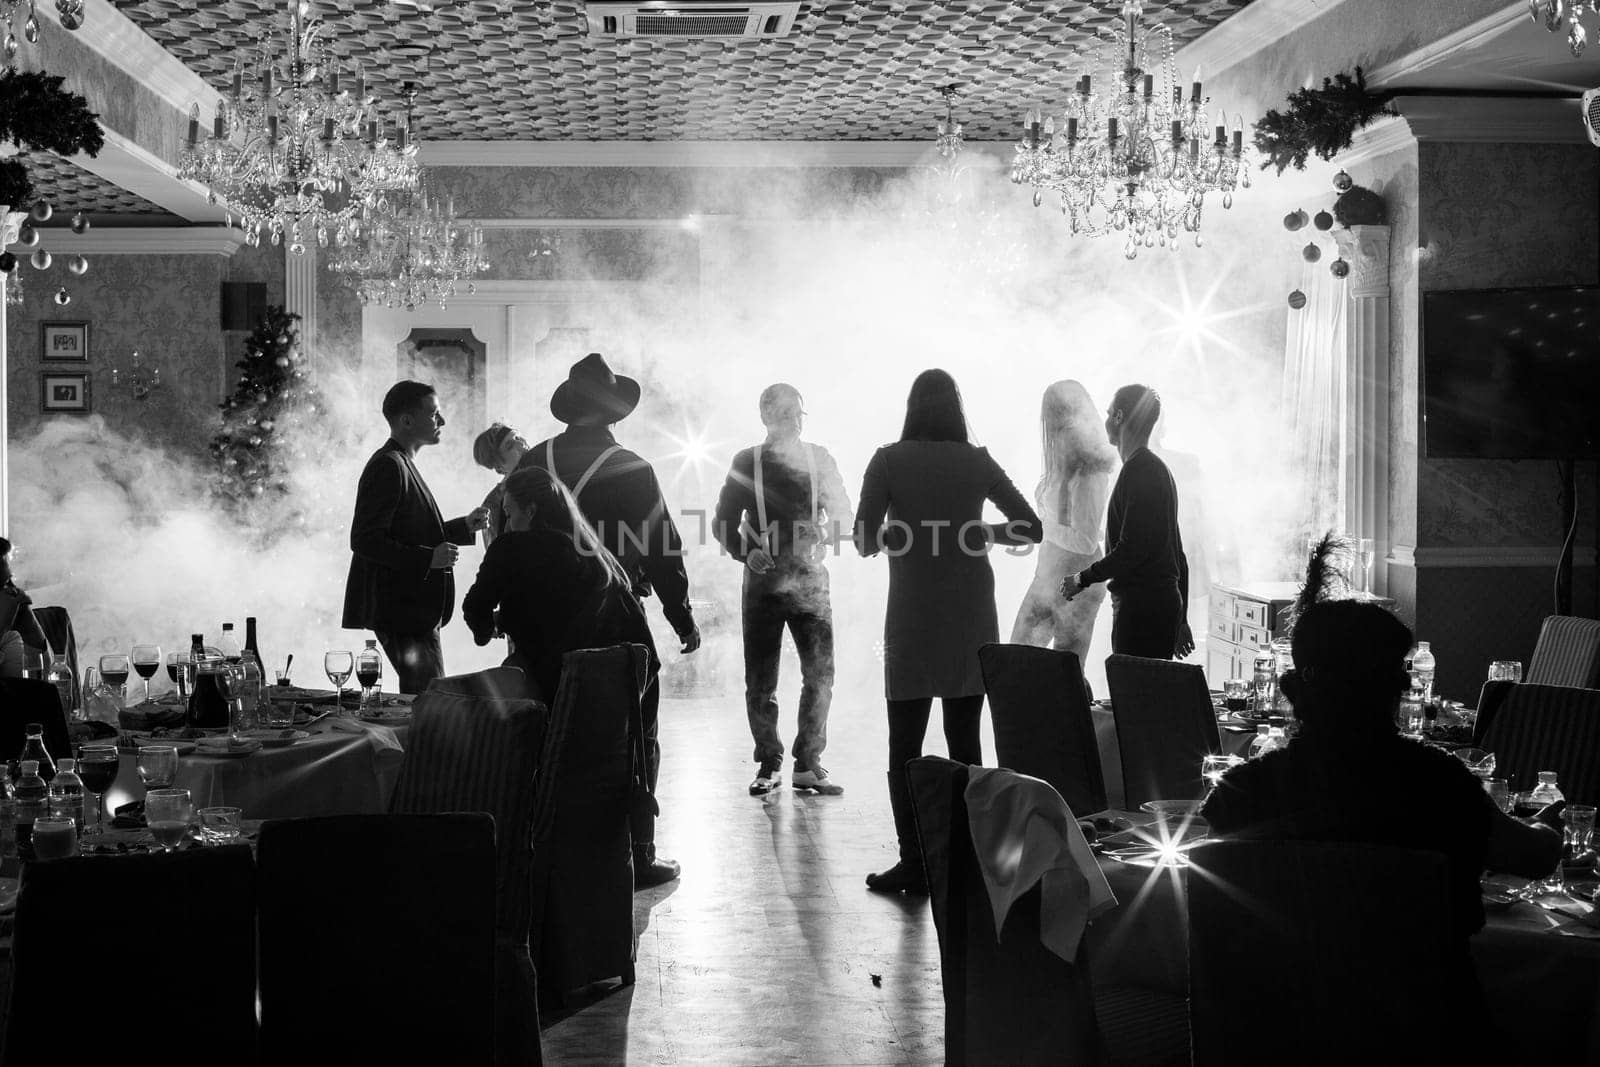 Corporativ Group of People dances in retro costumes. Silhouettes of dancing people at the disco in the clubYaremche, Bukovel, Ukraine - January 10, 2022 by malyshph